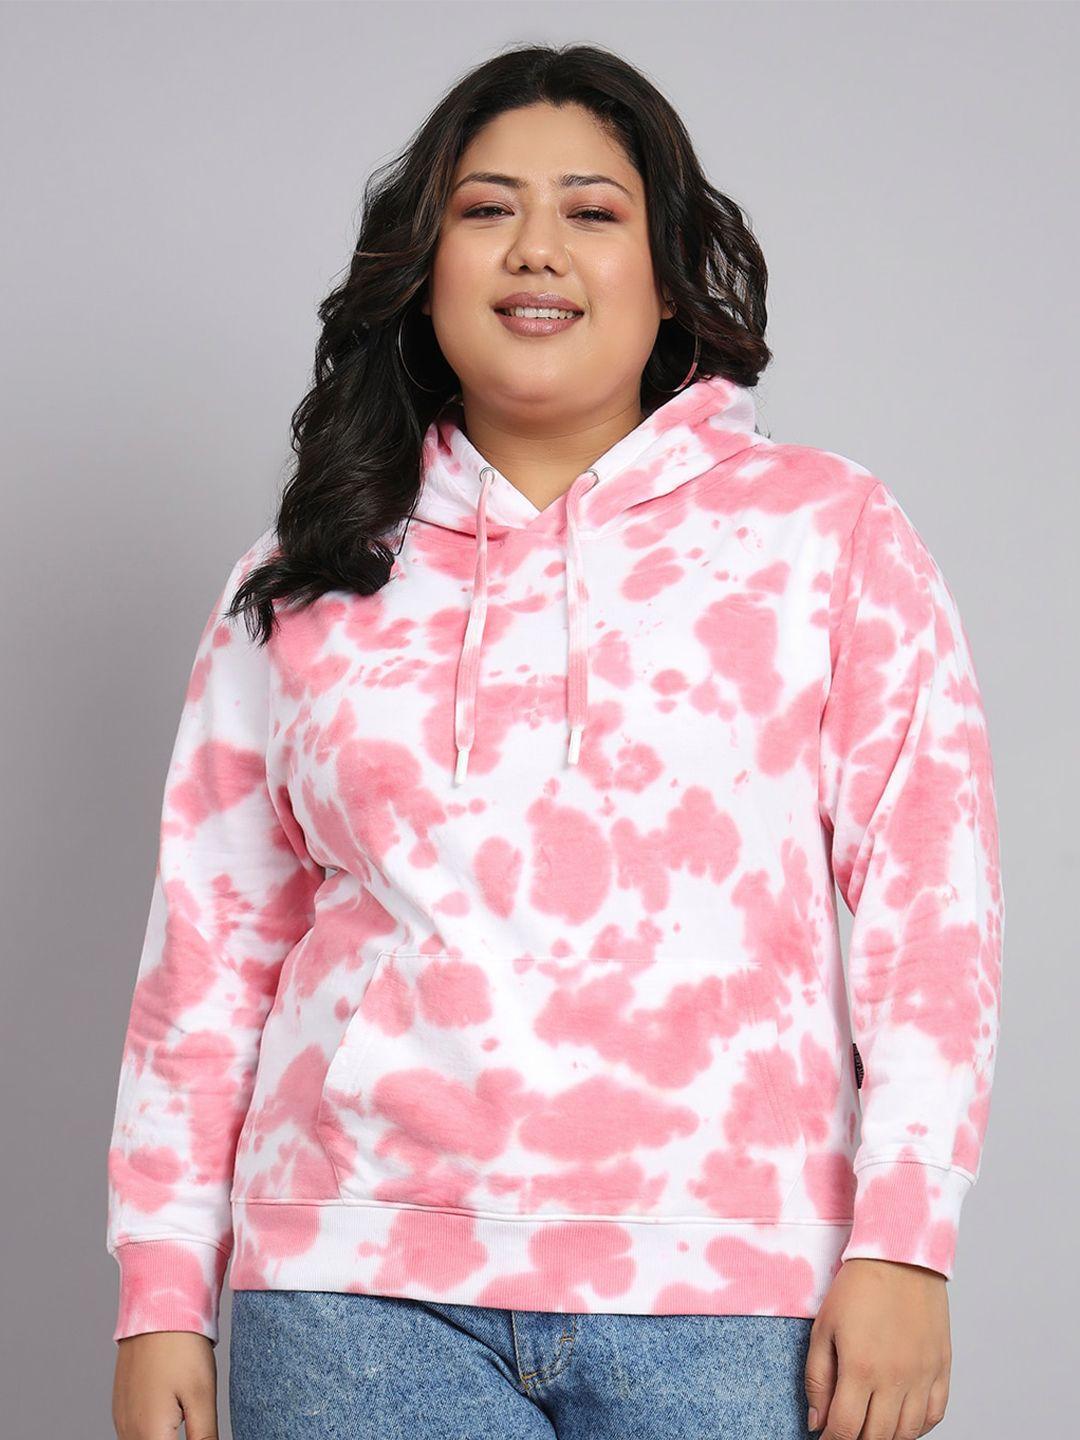 beyound size - the dry state plus size tie & dye dyed hooded pullover sweatshirt